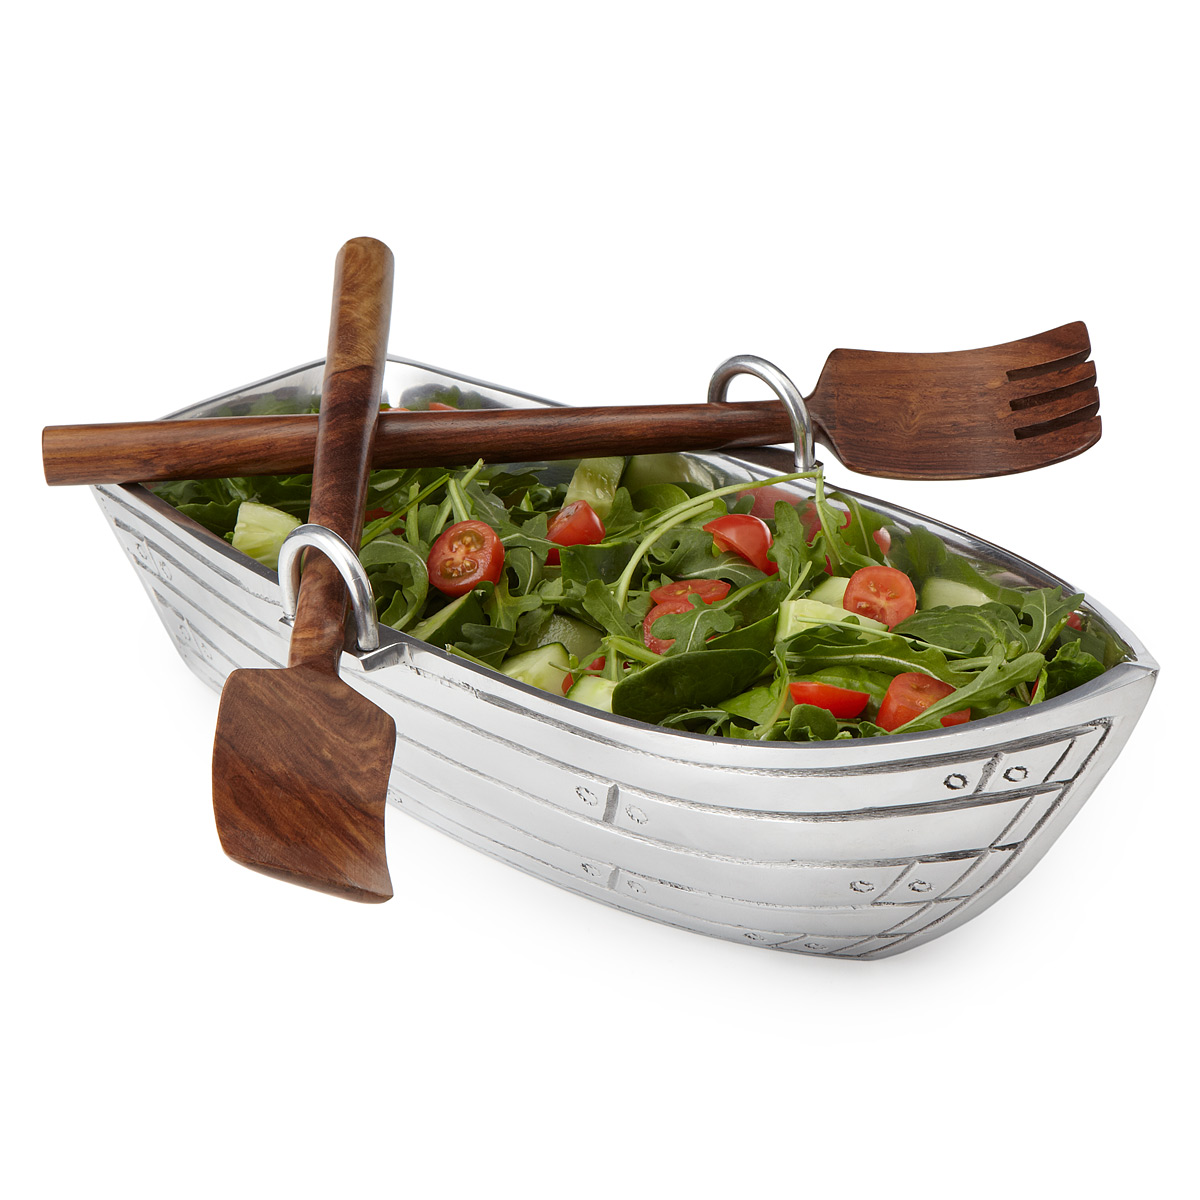 Row Boat Salad Bowl - All Gifts Considered